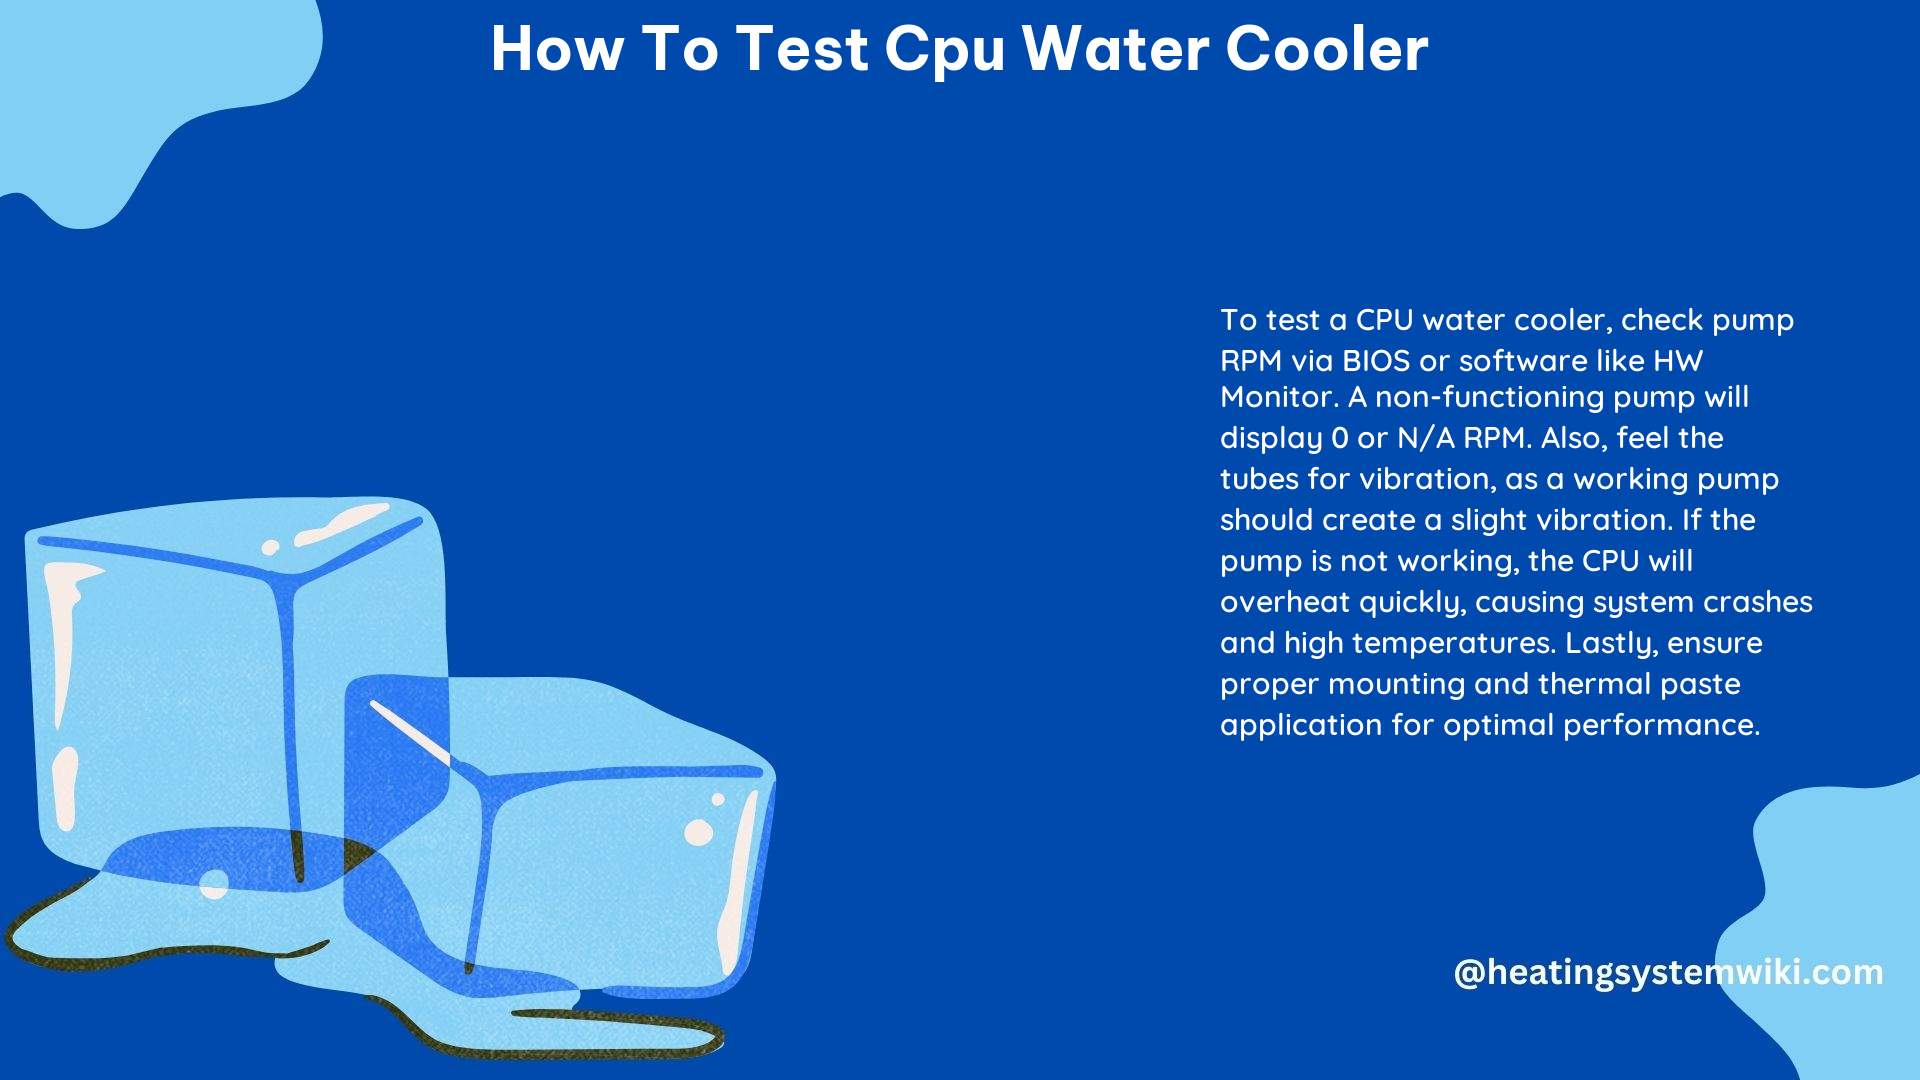 How to Test CPU Water Cooler